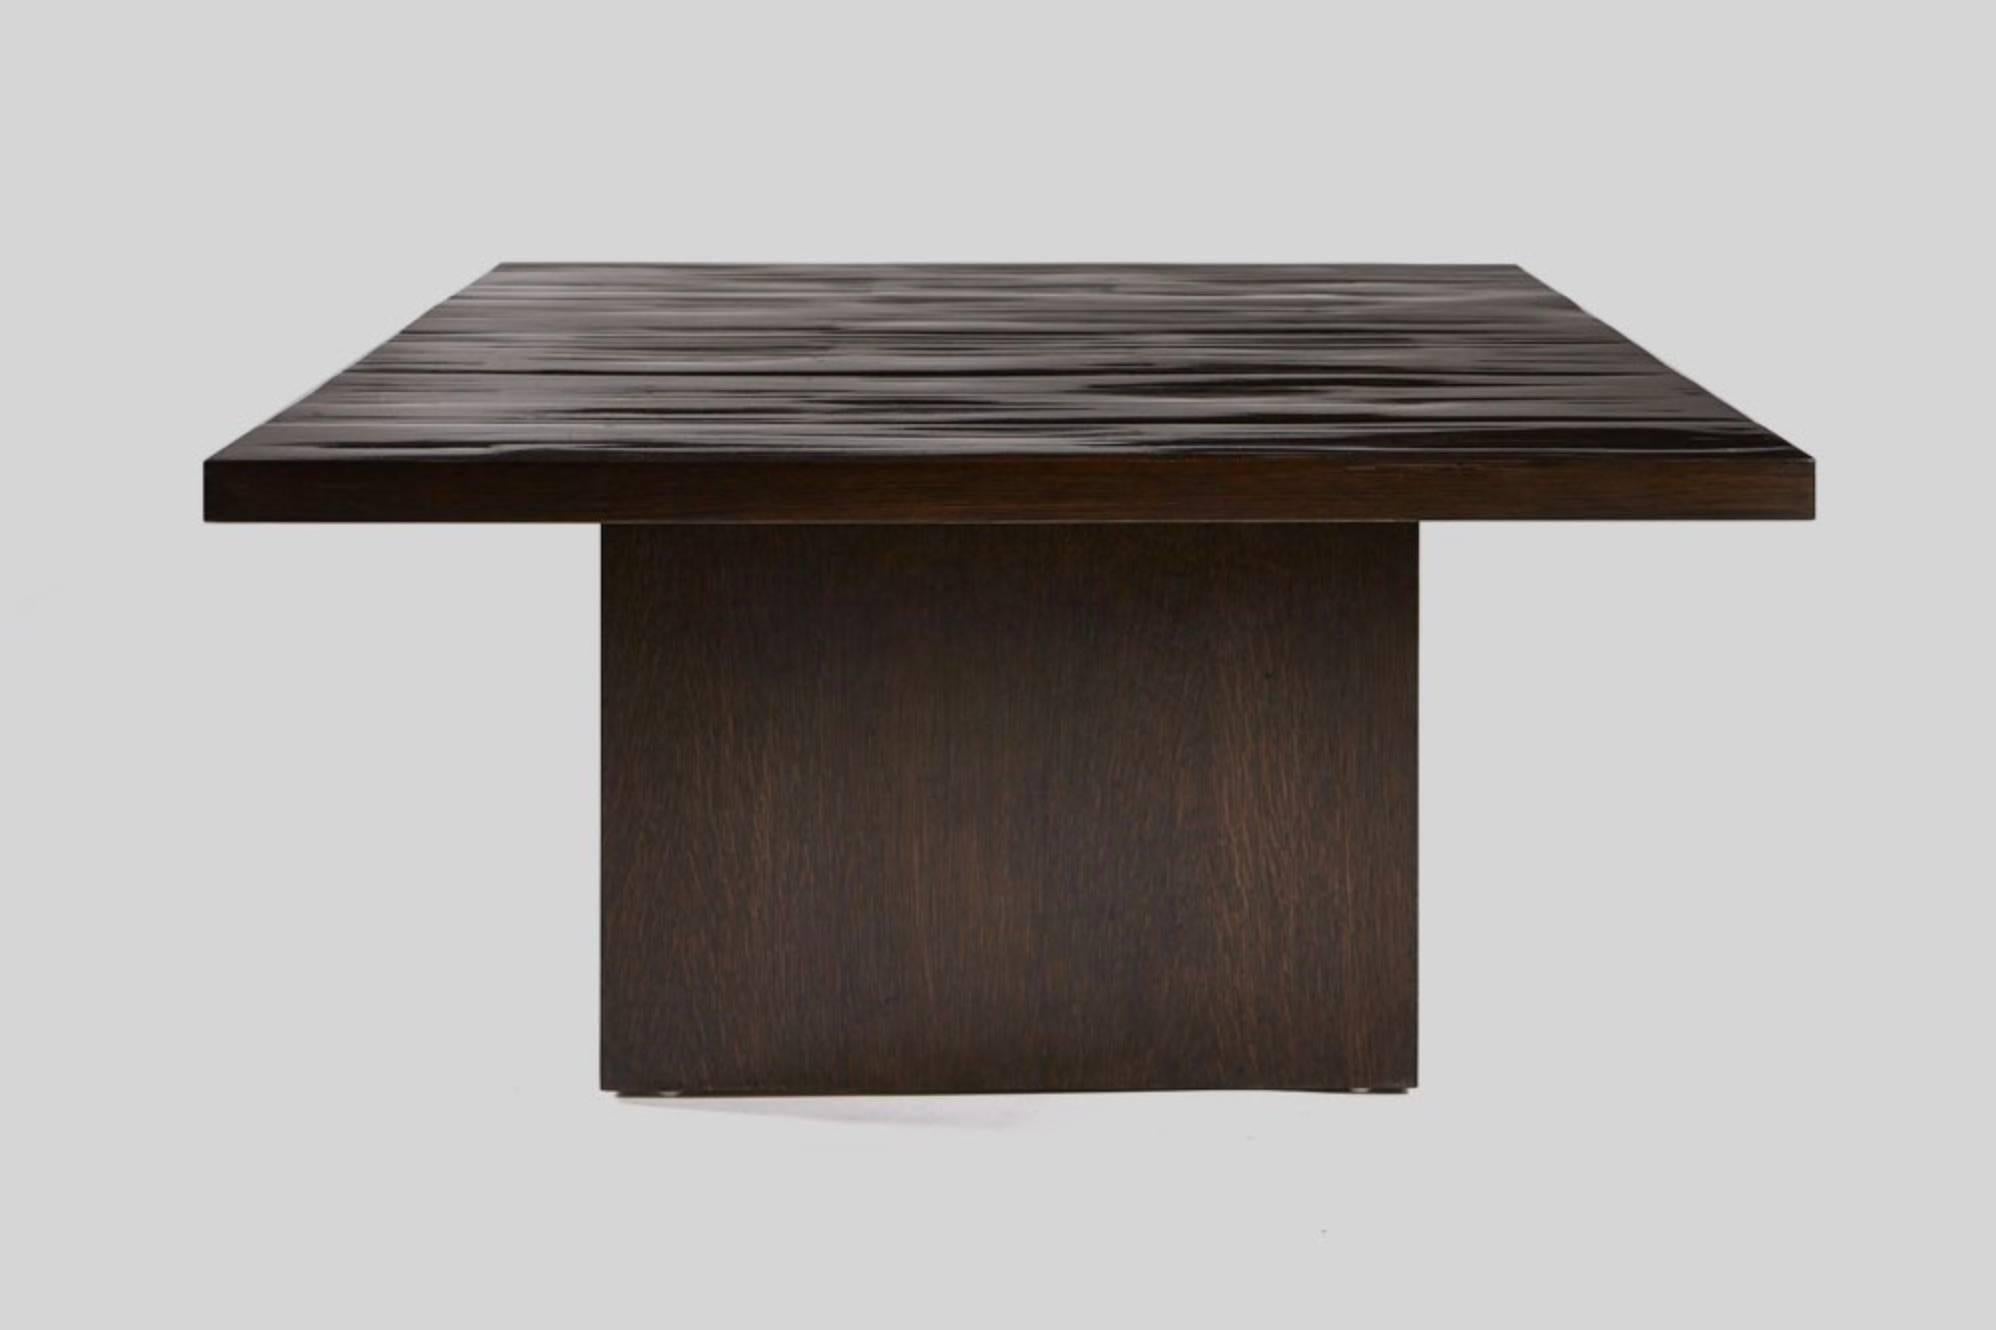 High-gloss lacquer highlights the natural beauty and texture of our Pine coffee table’s bamboo top
while balancing the matte finish of its rift-sawn oak base. A discreet shelf between the table’s legs
creates additional storage or display space